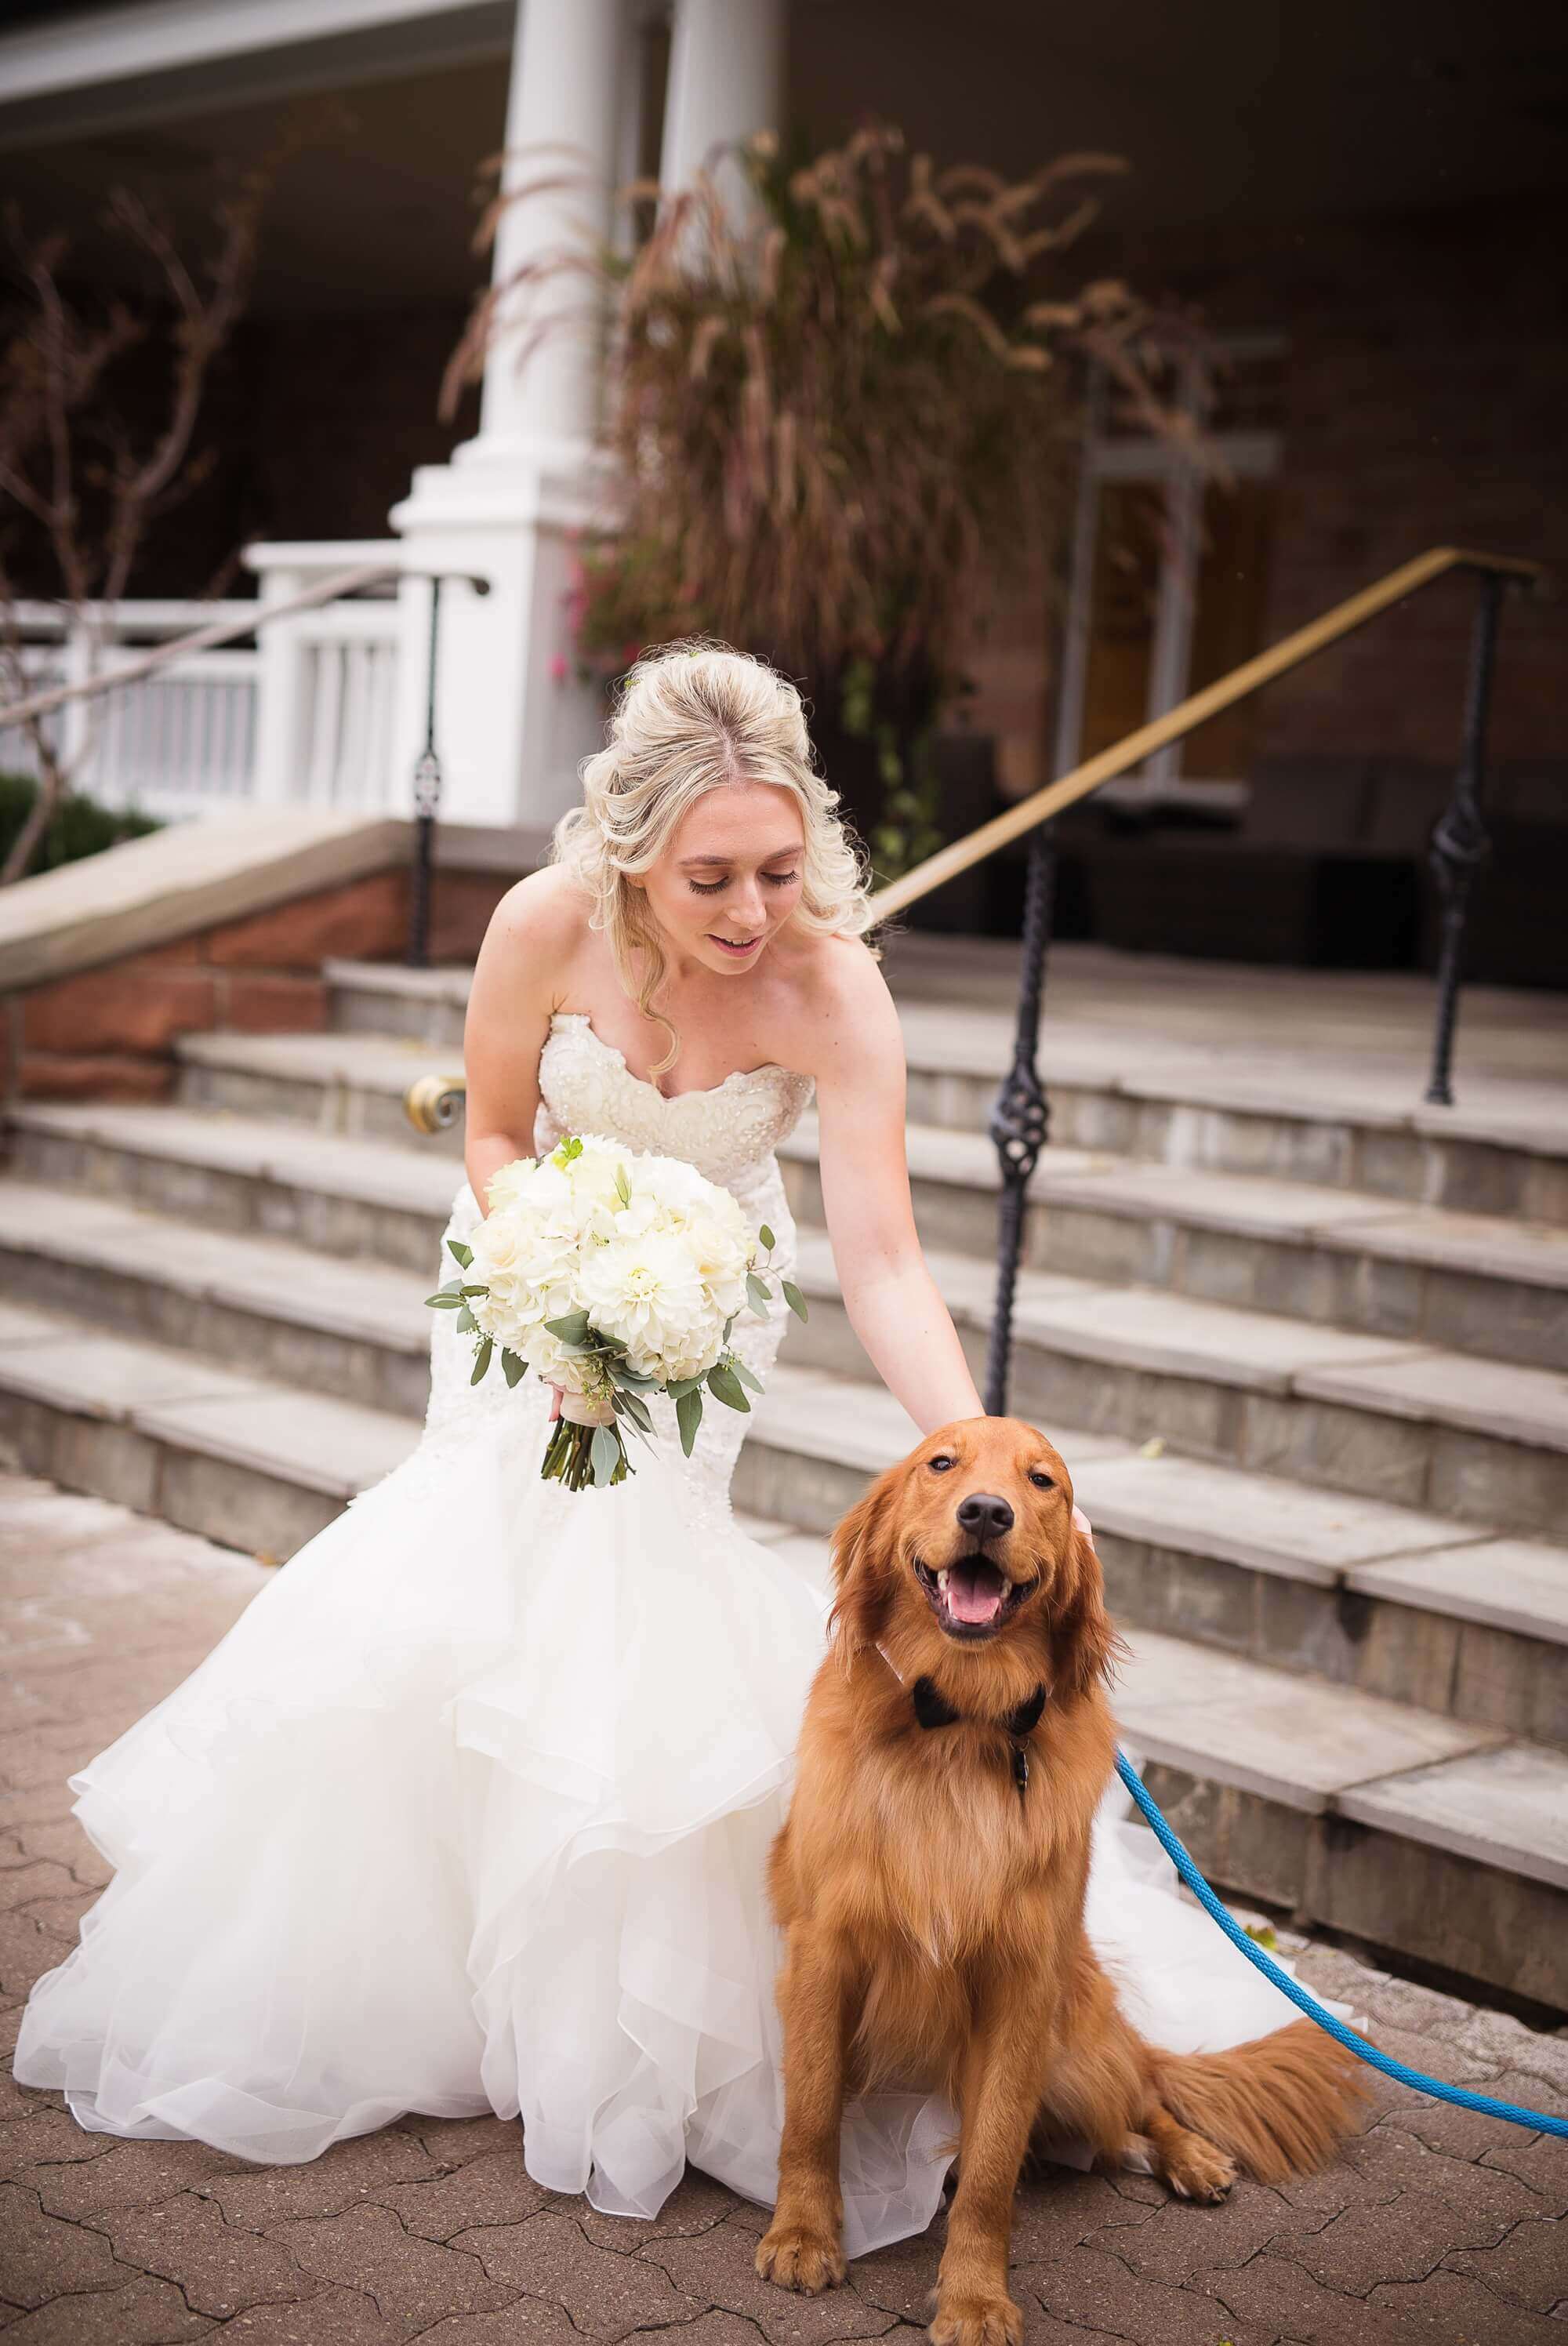 The bride and a dog after the ceremony at Lambton Golf & Country Club